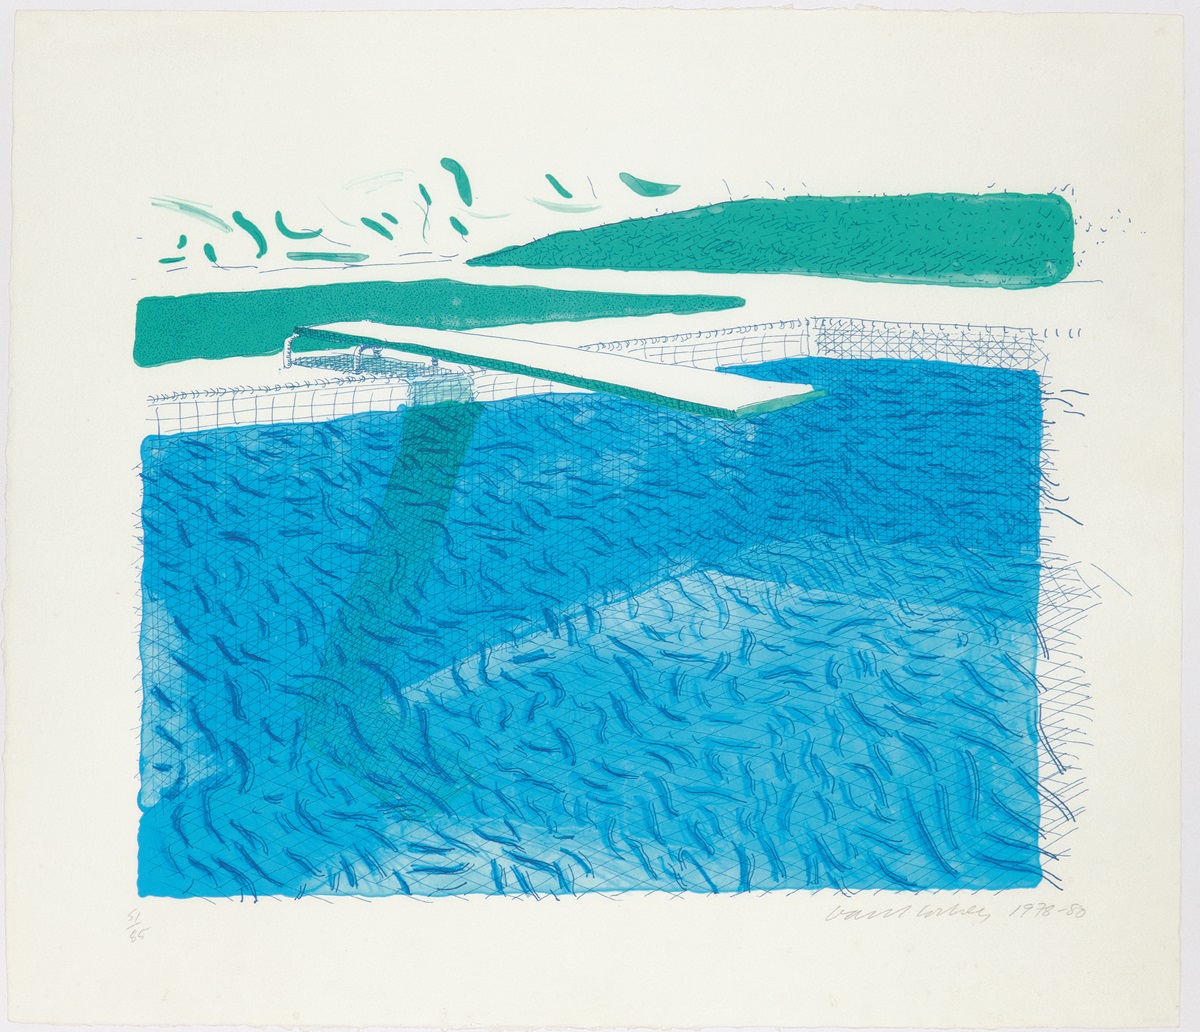 David Hockney, Lithographic Water Made of Lines, Crayon and Two Blue Washes, 1978-80. Salida: 86.000 euros: remate: 105.000 euros